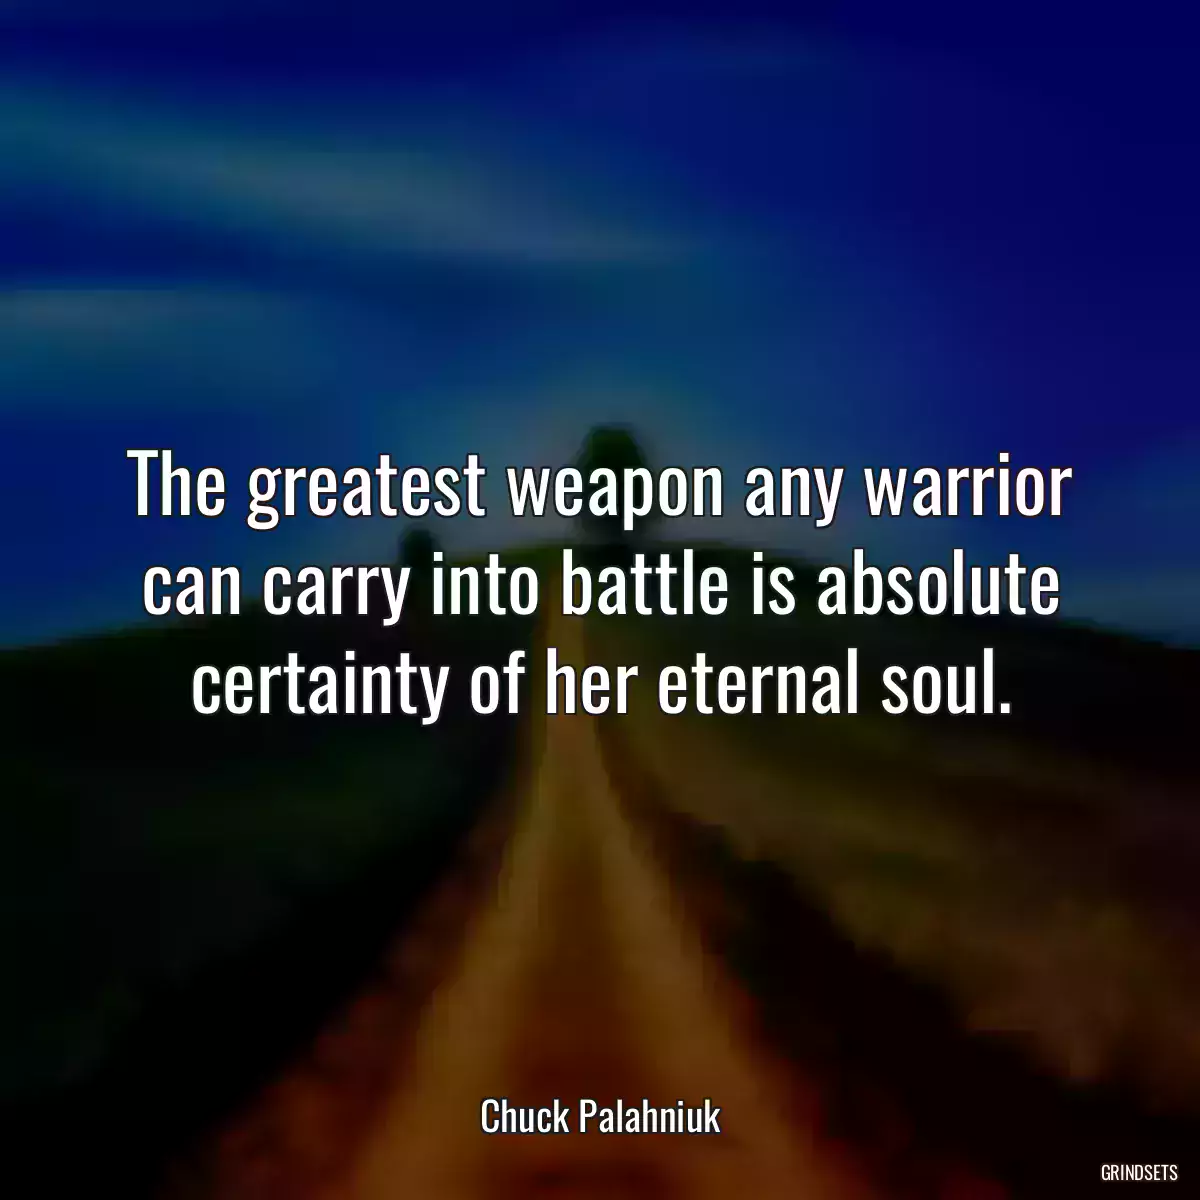 The greatest weapon any warrior can carry into battle is absolute certainty of her eternal soul.